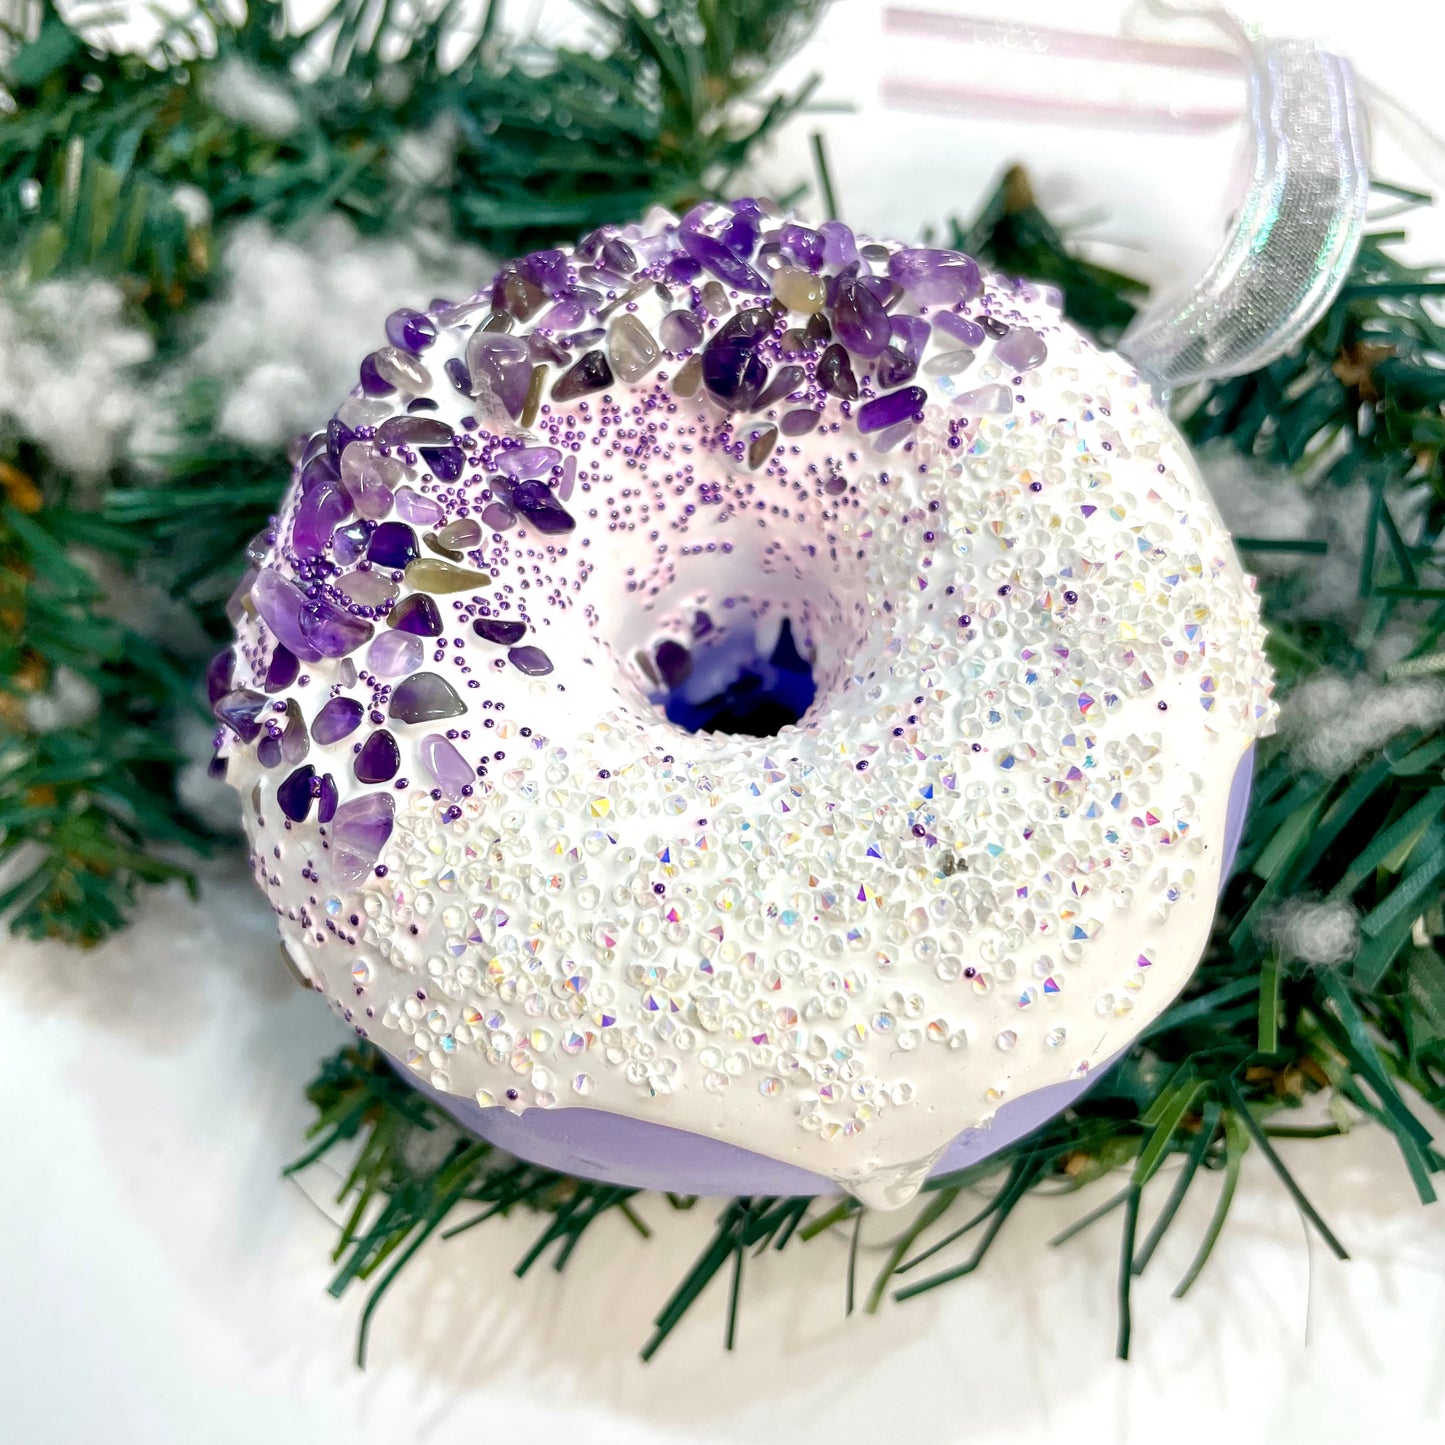 Donut Ornaments by Courtney Mixed Studios